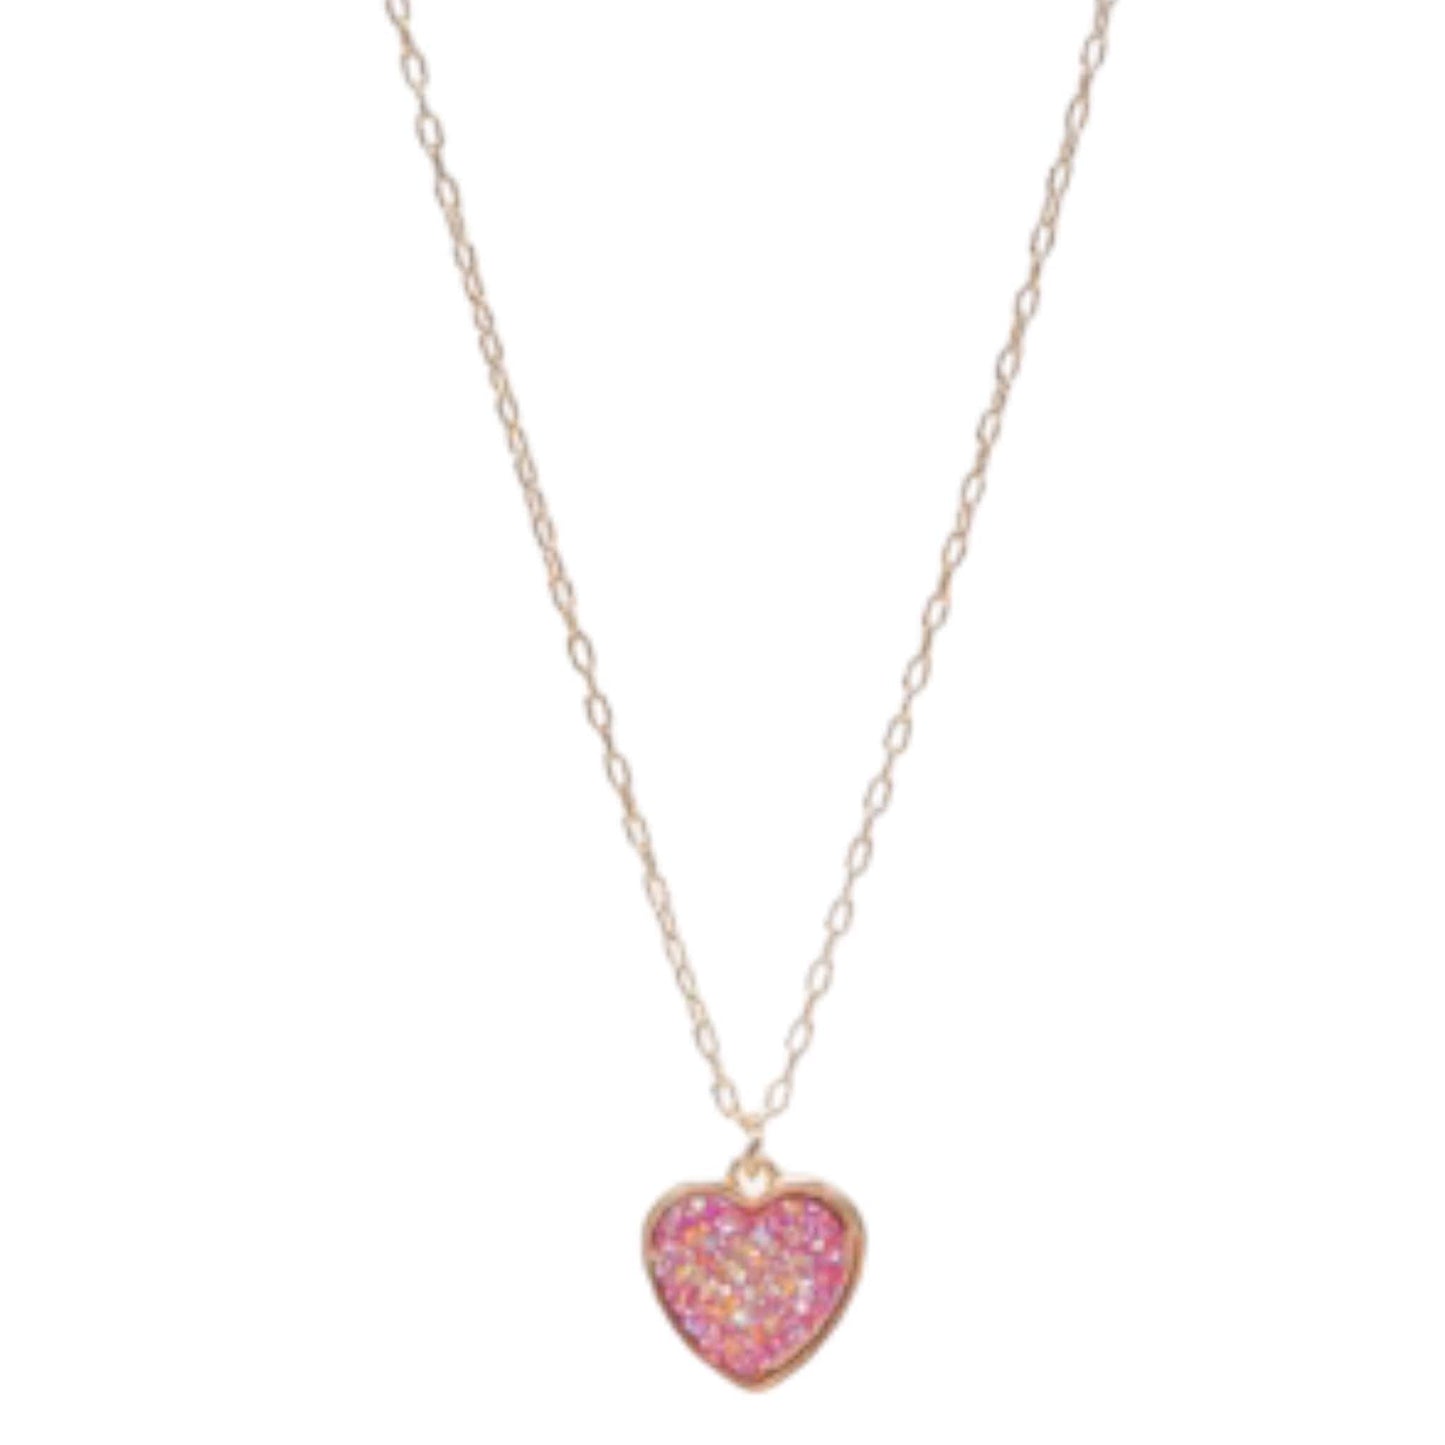 Heart-Shaped Druzy Pendant Necklace in Hot Pink